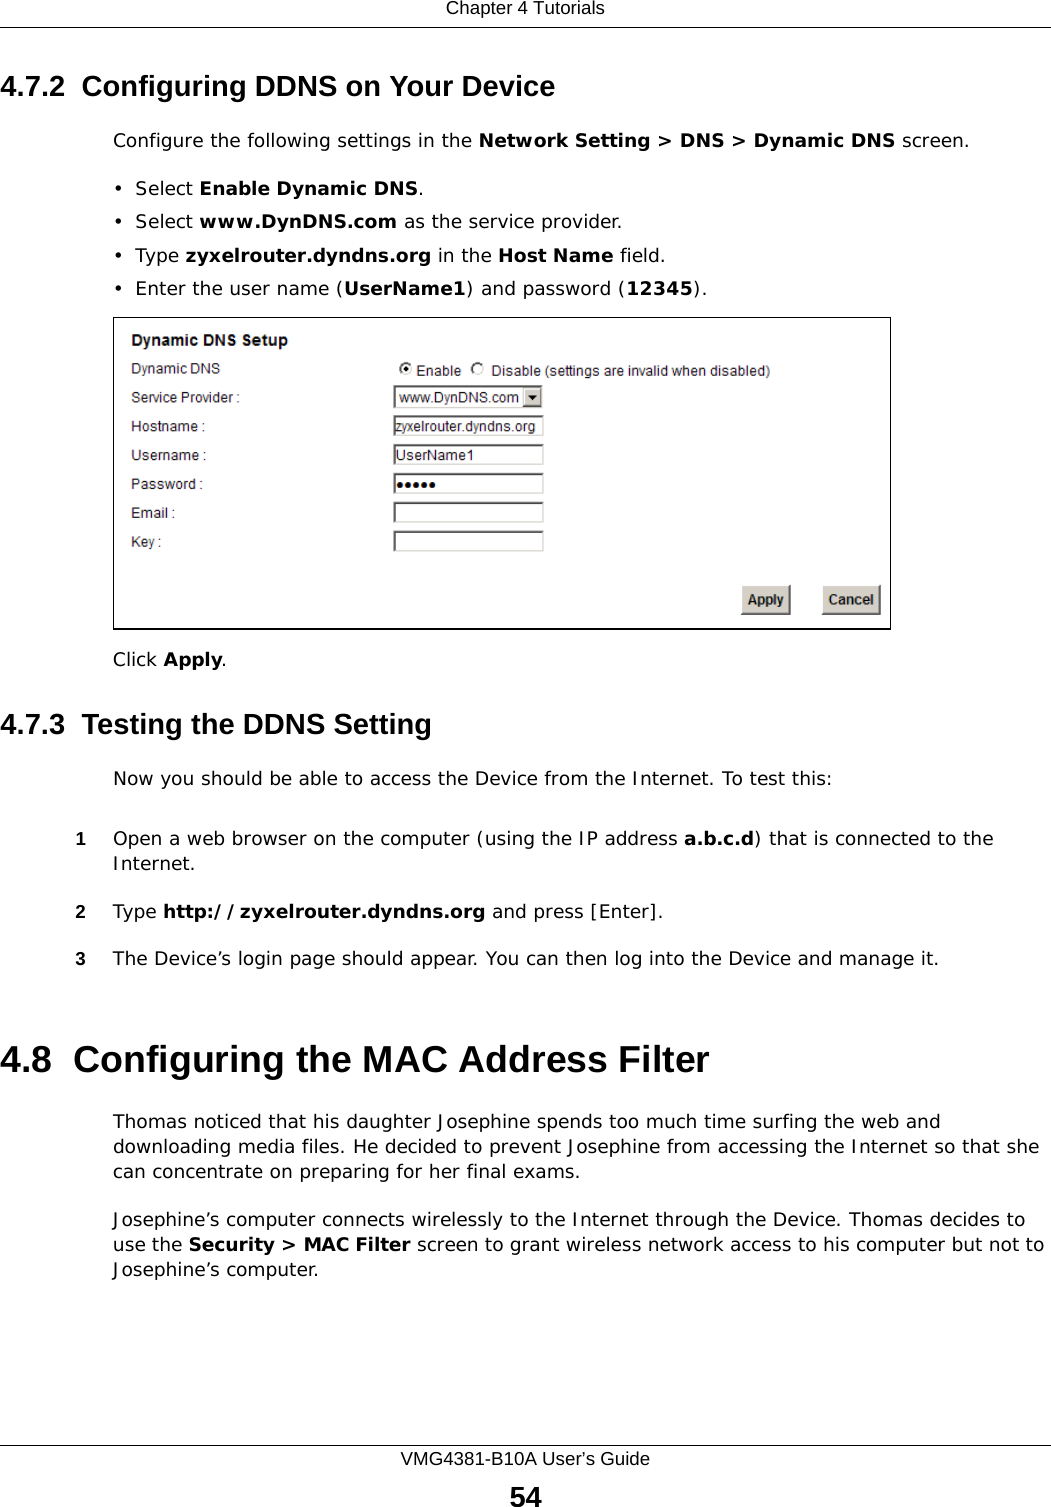 Chapter 4 TutorialsVMG4381-B10A User’s Guide544.7.2  Configuring DDNS on Your DeviceConfigure the following settings in the Network Setting &gt; DNS &gt; Dynamic DNS screen.•Select Enable Dynamic DNS.•Select www.DynDNS.com as the service provider.•Type zyxelrouter.dyndns.org in the Host Name field.• Enter the user name (UserName1) and password (12345).Click Apply.4.7.3  Testing the DDNS SettingNow you should be able to access the Device from the Internet. To test this:1Open a web browser on the computer (using the IP address a.b.c.d) that is connected to the Internet.2Type http://zyxelrouter.dyndns.org and press [Enter].3The Device’s login page should appear. You can then log into the Device and manage it.4.8  Configuring the MAC Address FilterThomas noticed that his daughter Josephine spends too much time surfing the web and downloading media files. He decided to prevent Josephine from accessing the Internet so that she can concentrate on preparing for her final exams.Josephine’s computer connects wirelessly to the Internet through the Device. Thomas decides to use the Security &gt; MAC Filter screen to grant wireless network access to his computer but not to Josephine’s computer. 